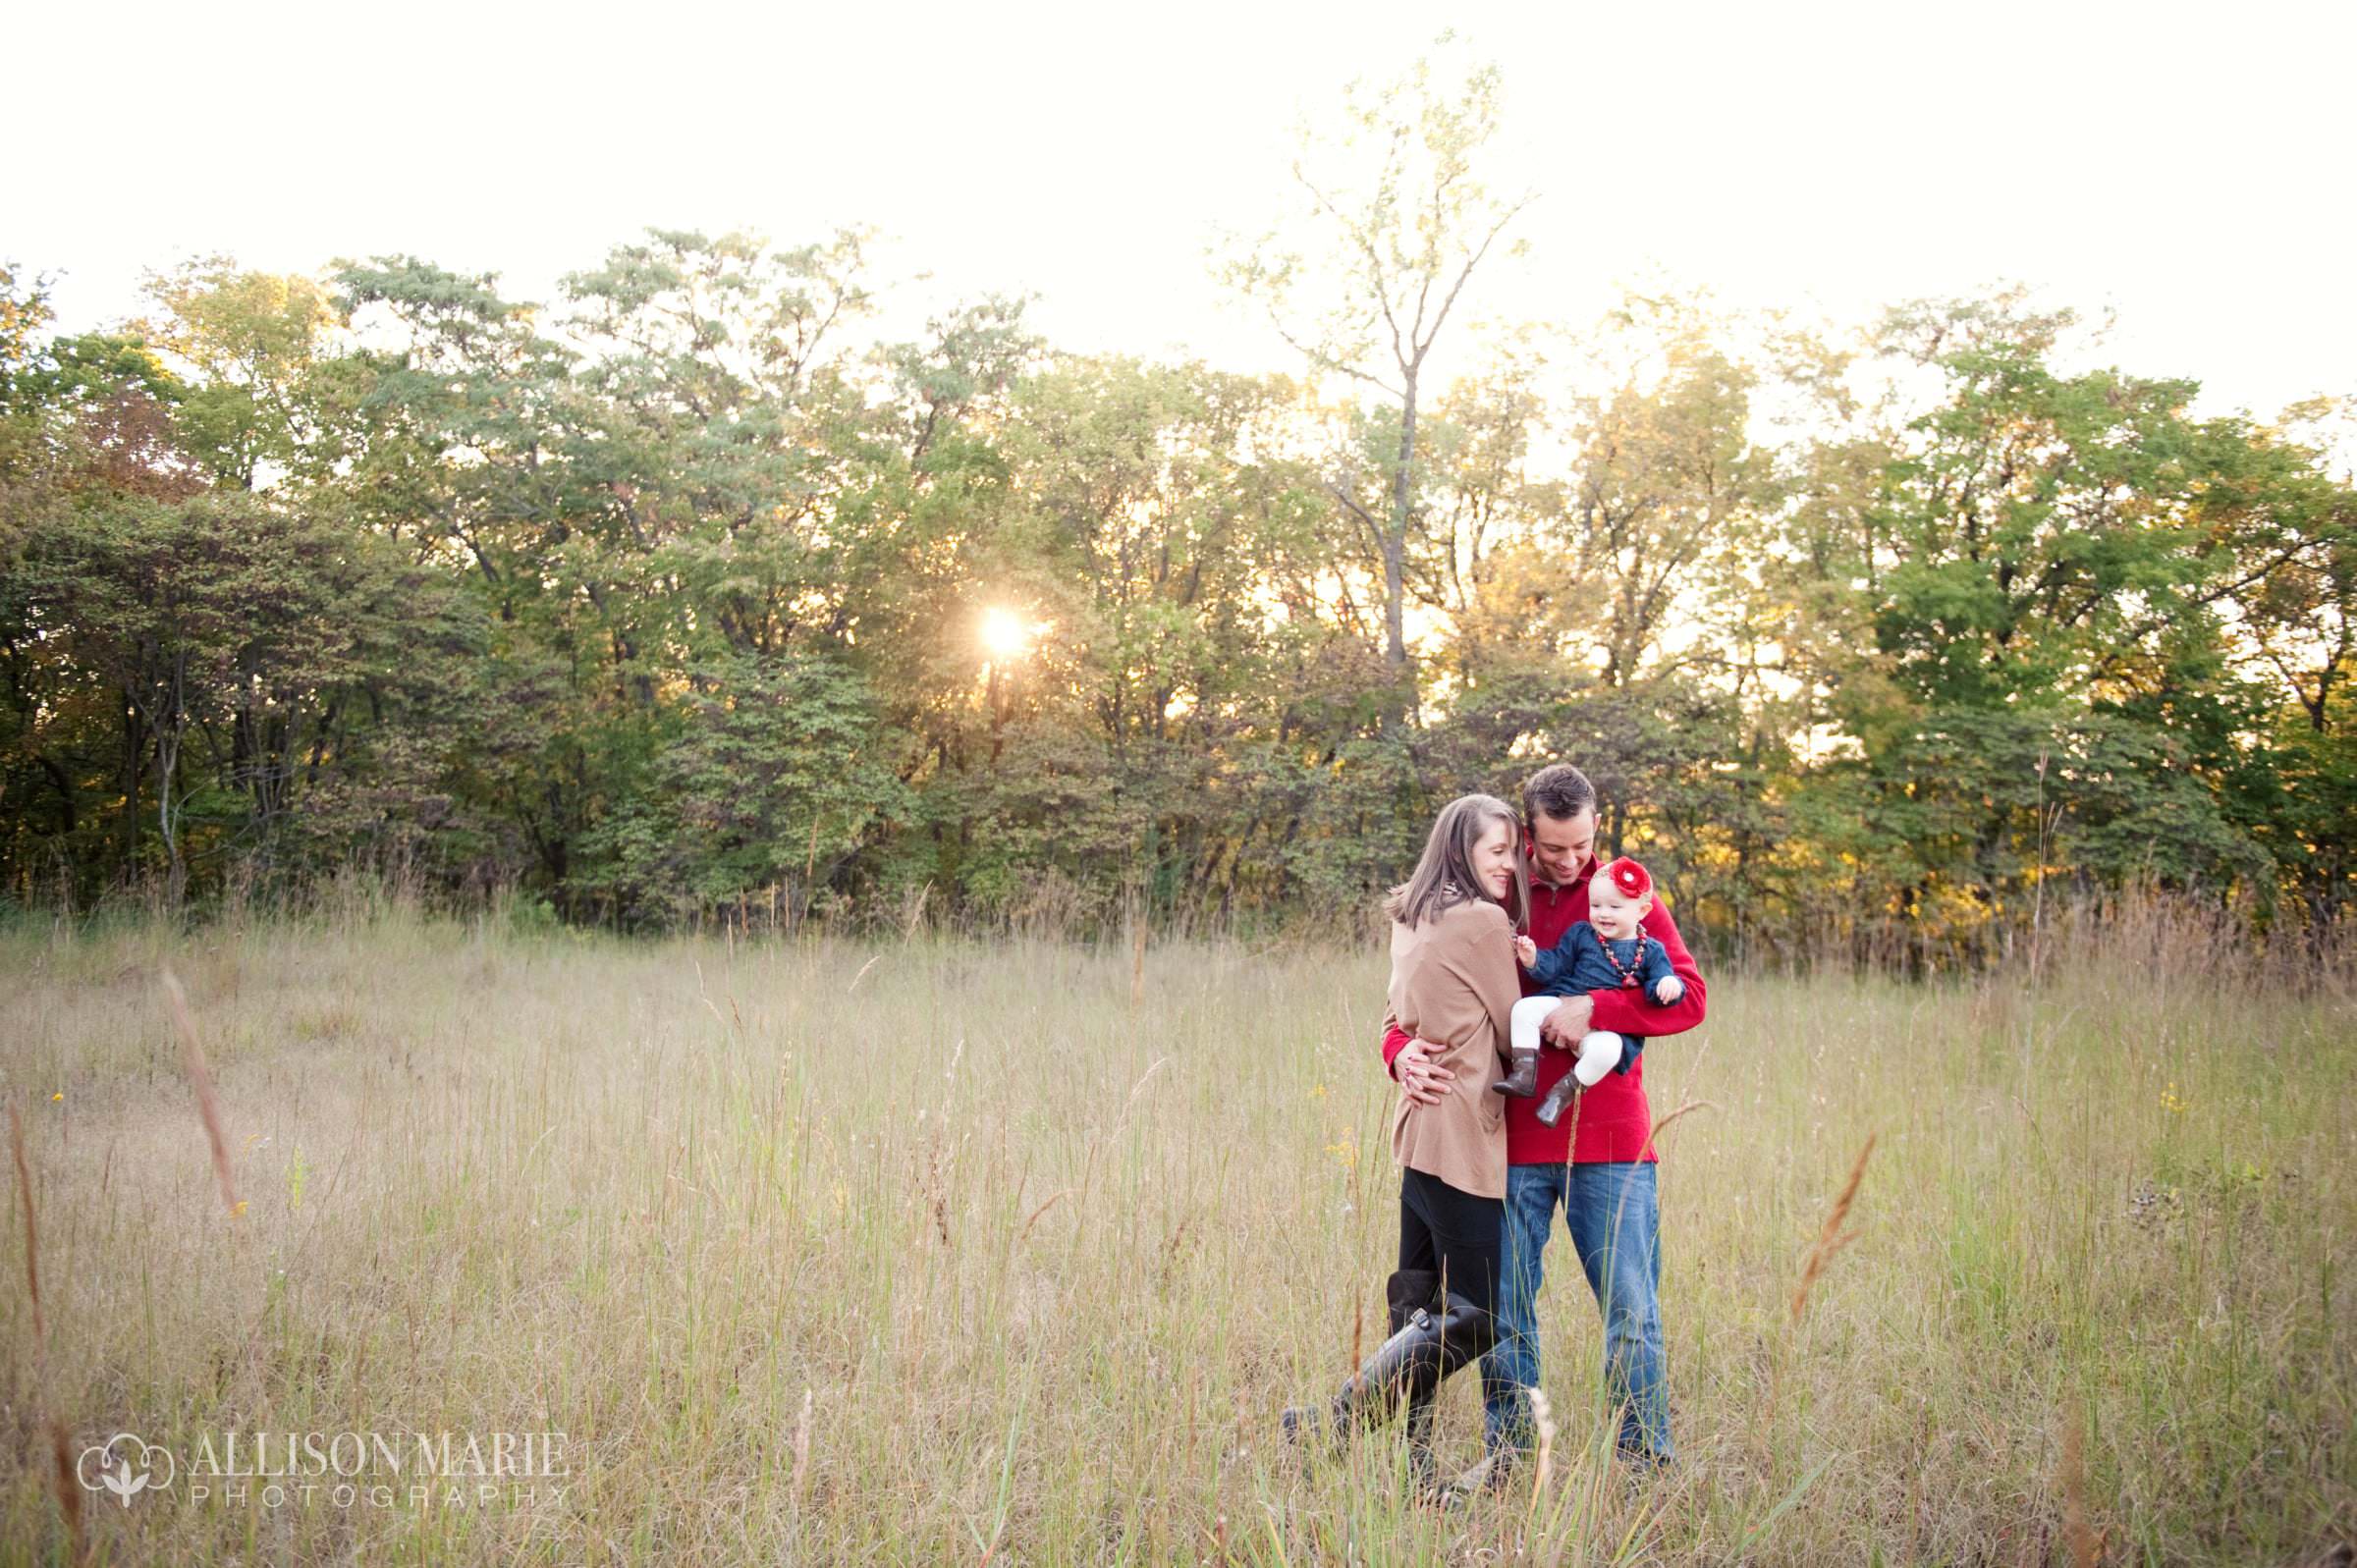 Favorite Family Images 2014, Allison Marie Photography15